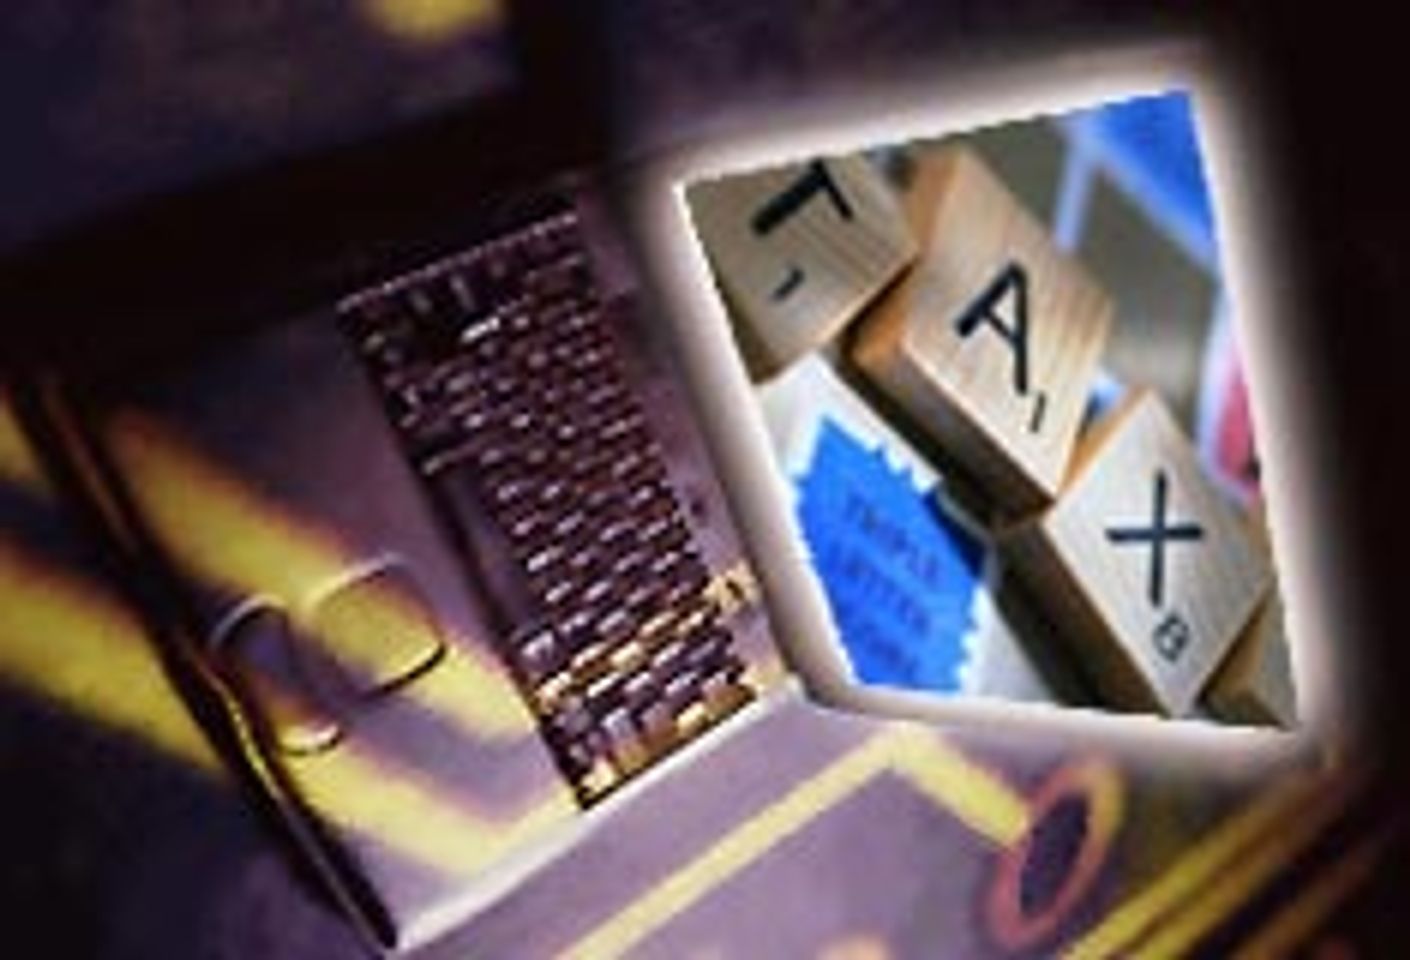 High-Speed Net Taxes Could Hurt Consumers, Economy: Study